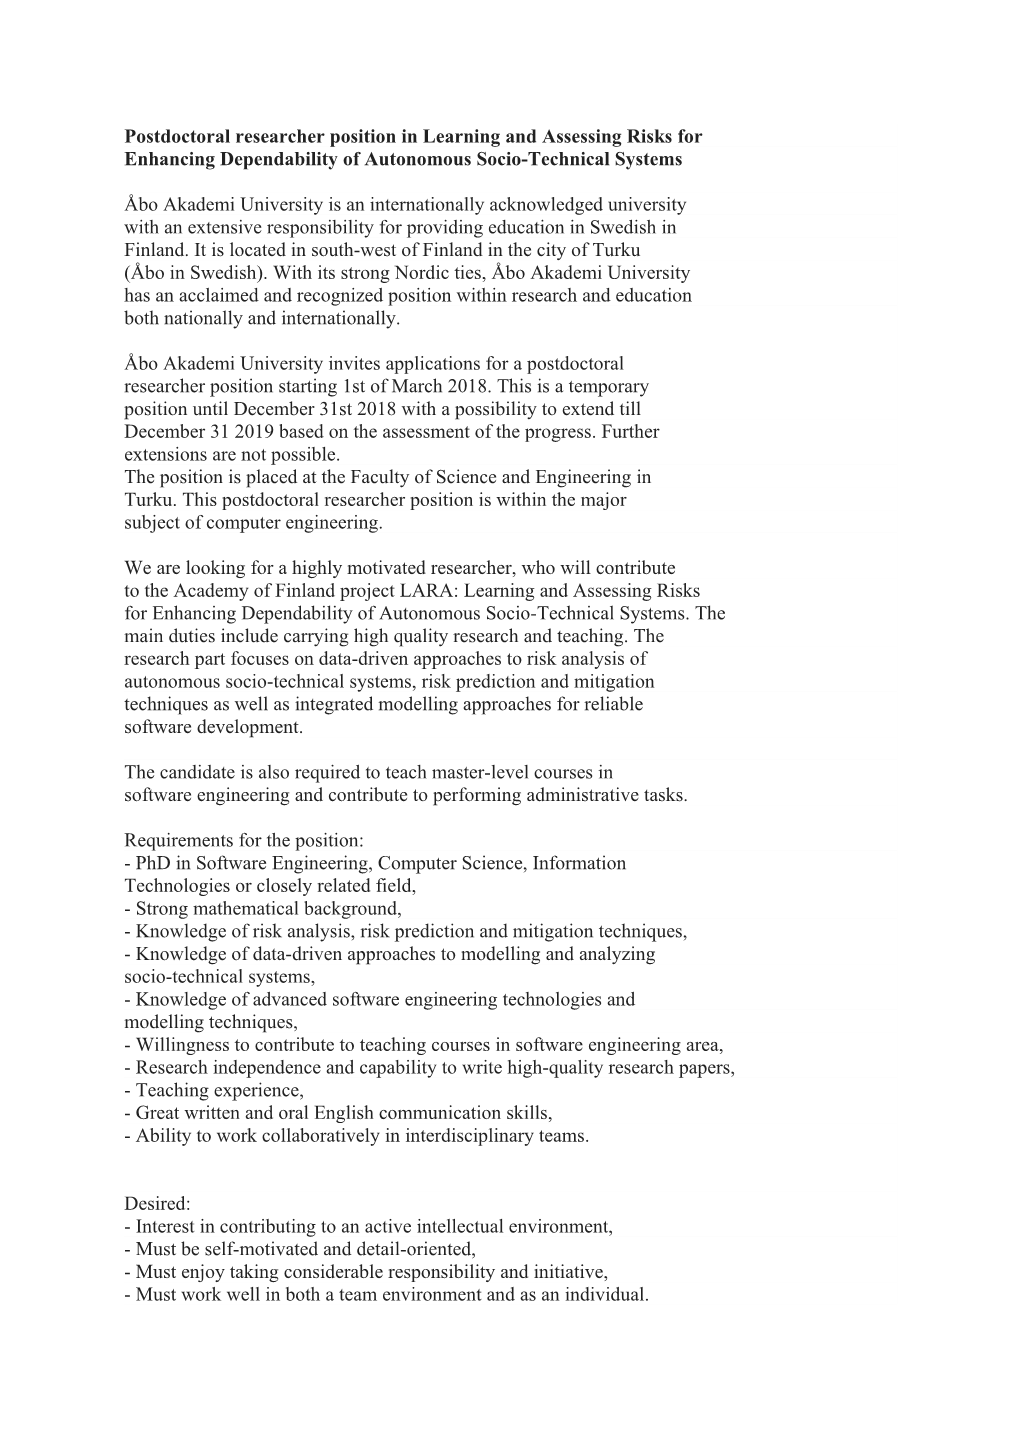 Postdoctoral Researcher Position in Learning and Assessing Risks For